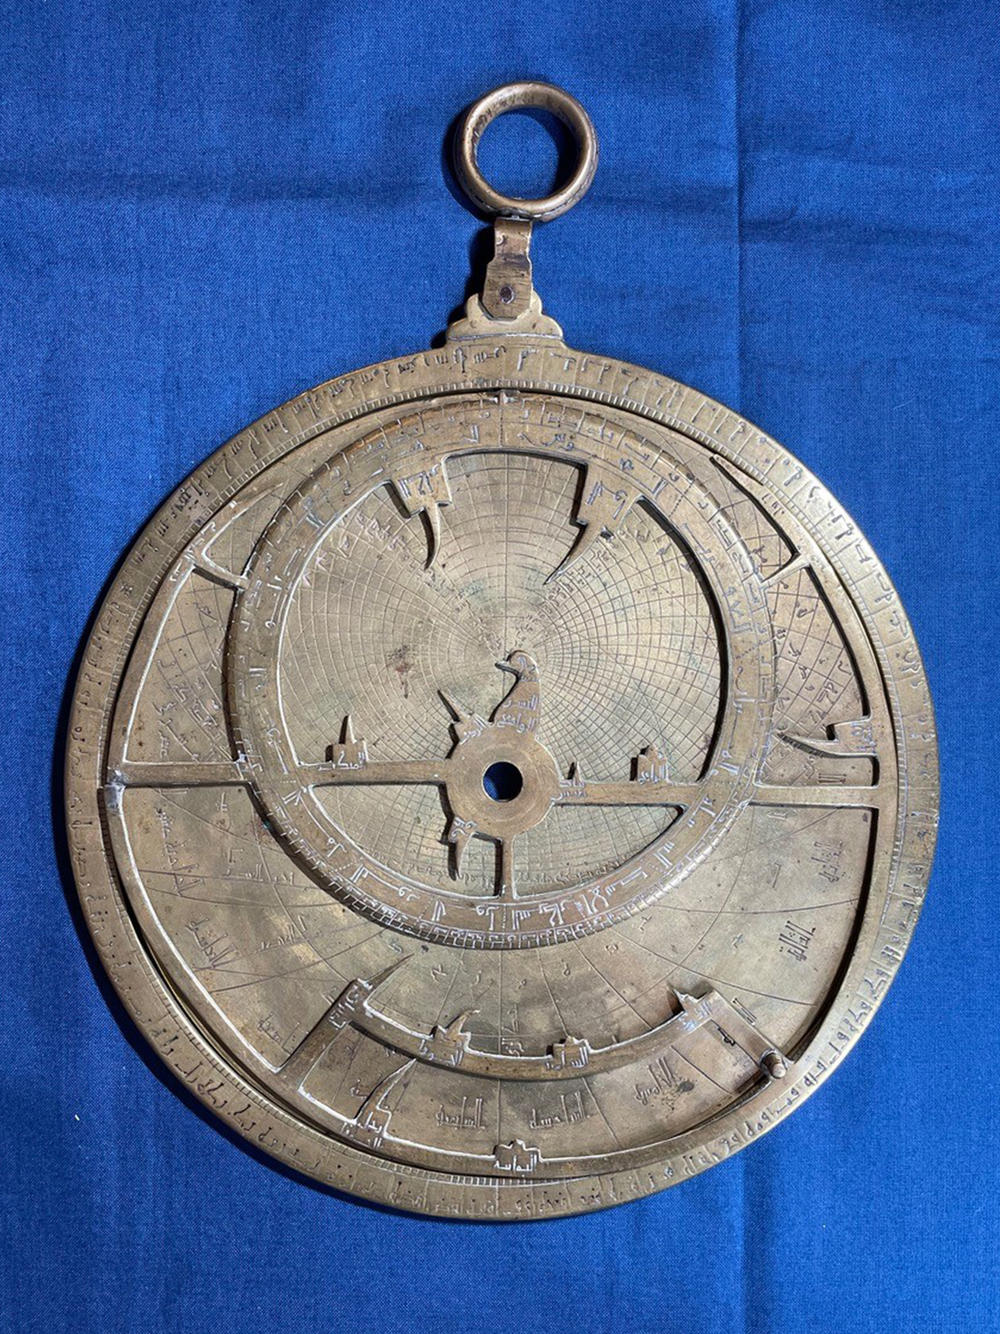 Markings on the Verona astrolabe speak to a time when Muslim, Jewish and Christian scholars built upon each others' work.